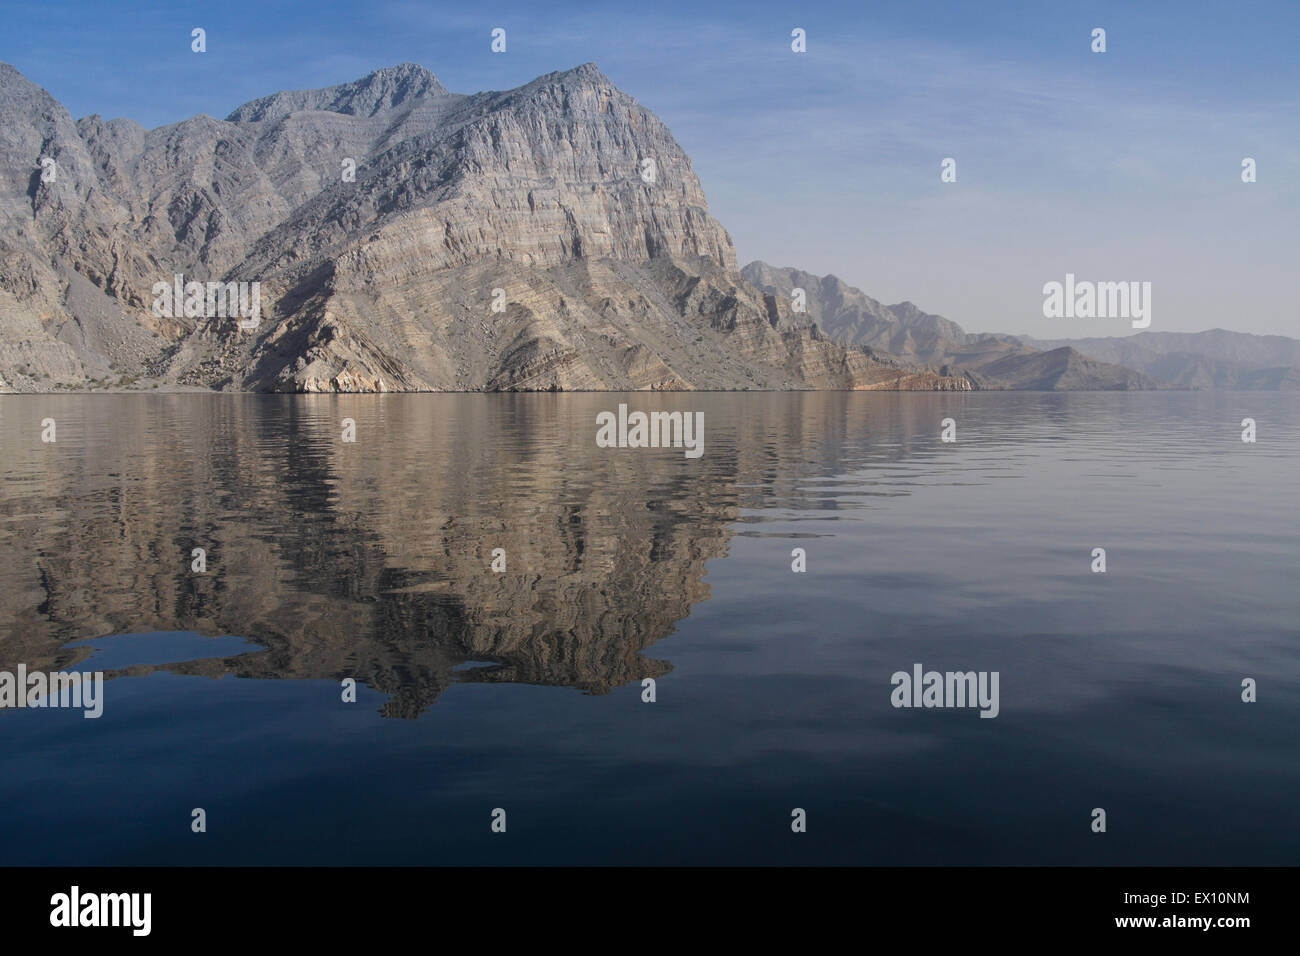 Rocky mountains reflected in the waters of a khor (fiord), Musandam Peninsula, Oman Stock Photo